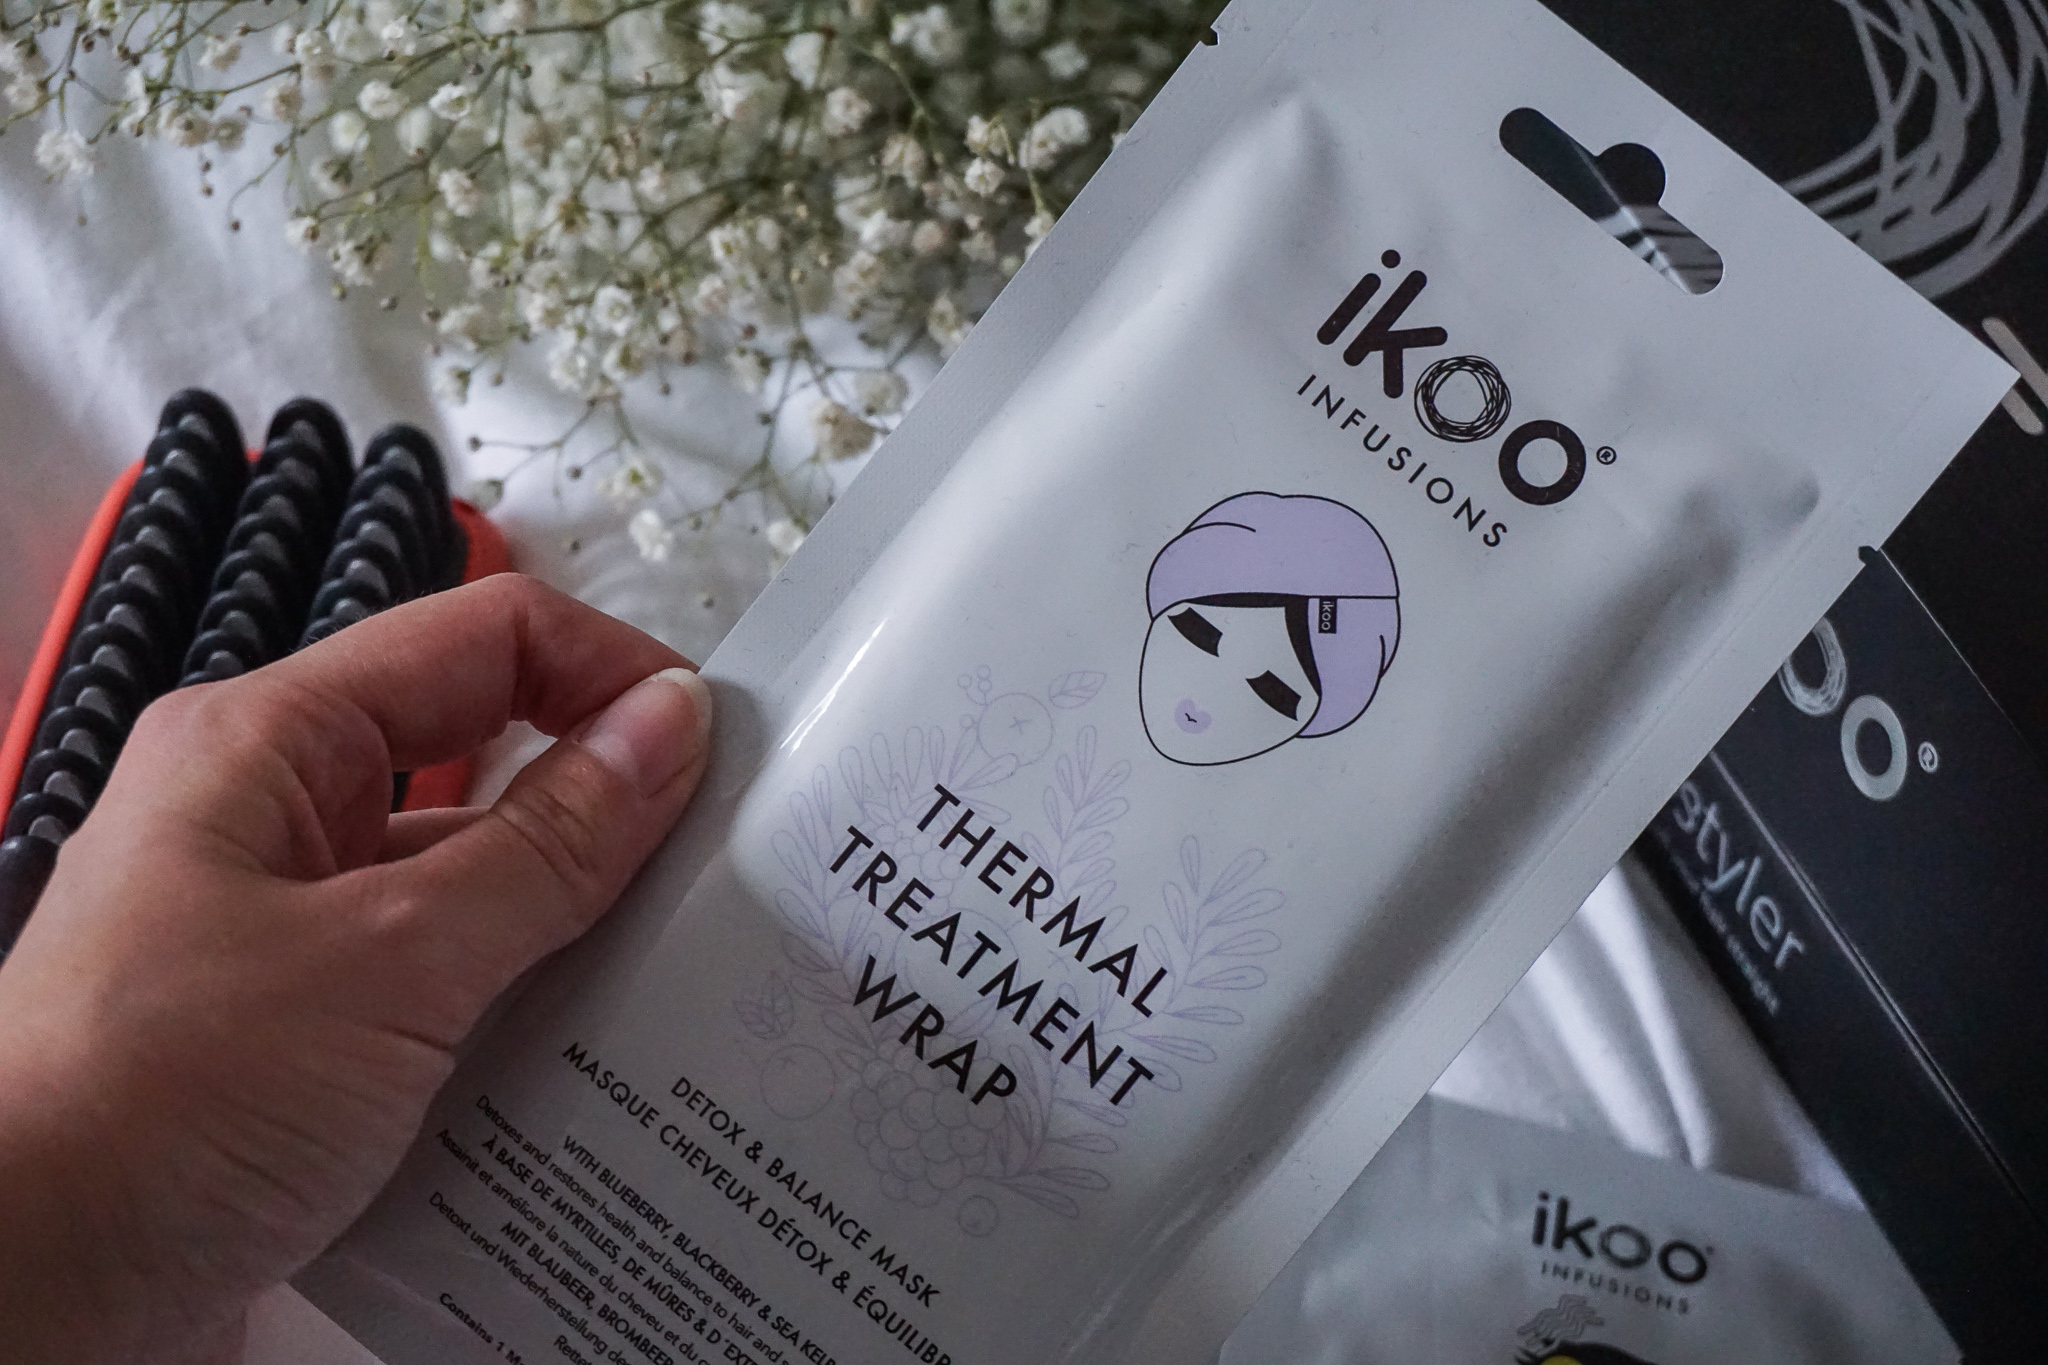 ikoo brush thermal treatment wrap | The Chic Advocate